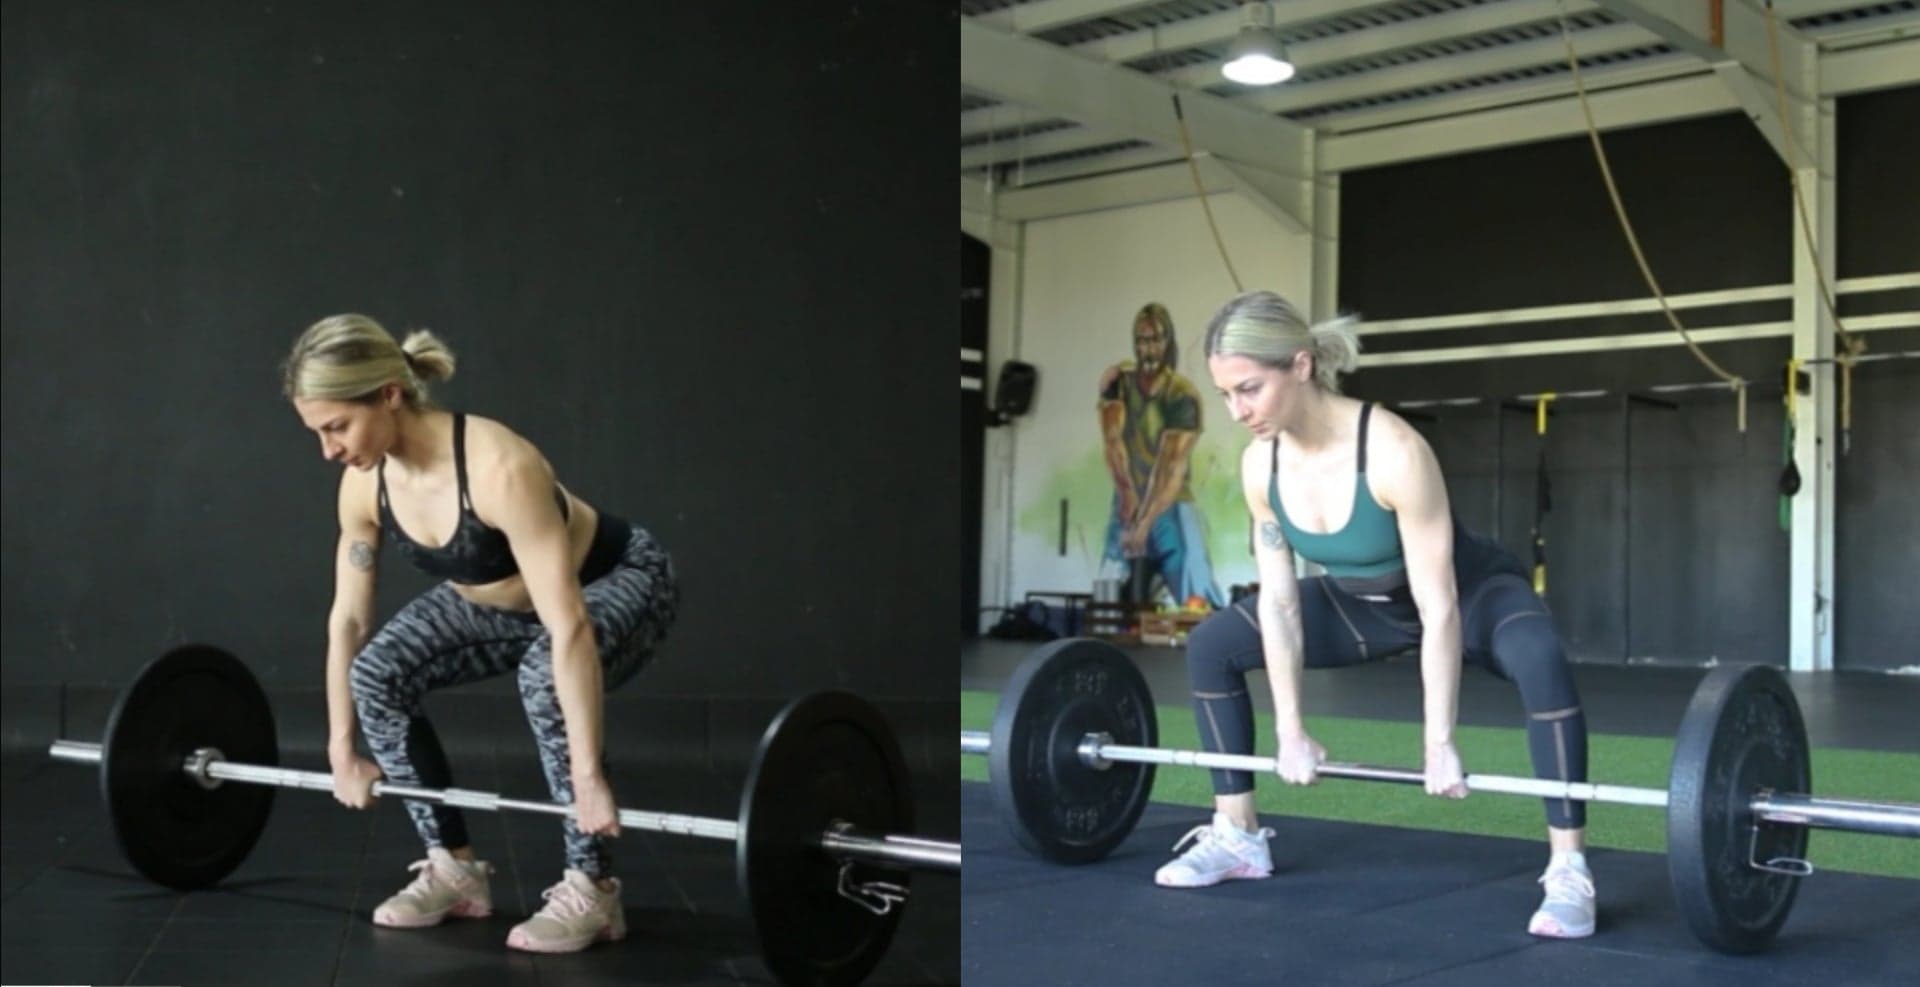 conventional vs sumo Deadlift which one is best  Leg and glute workout,  Deadlift, Gym workout tips